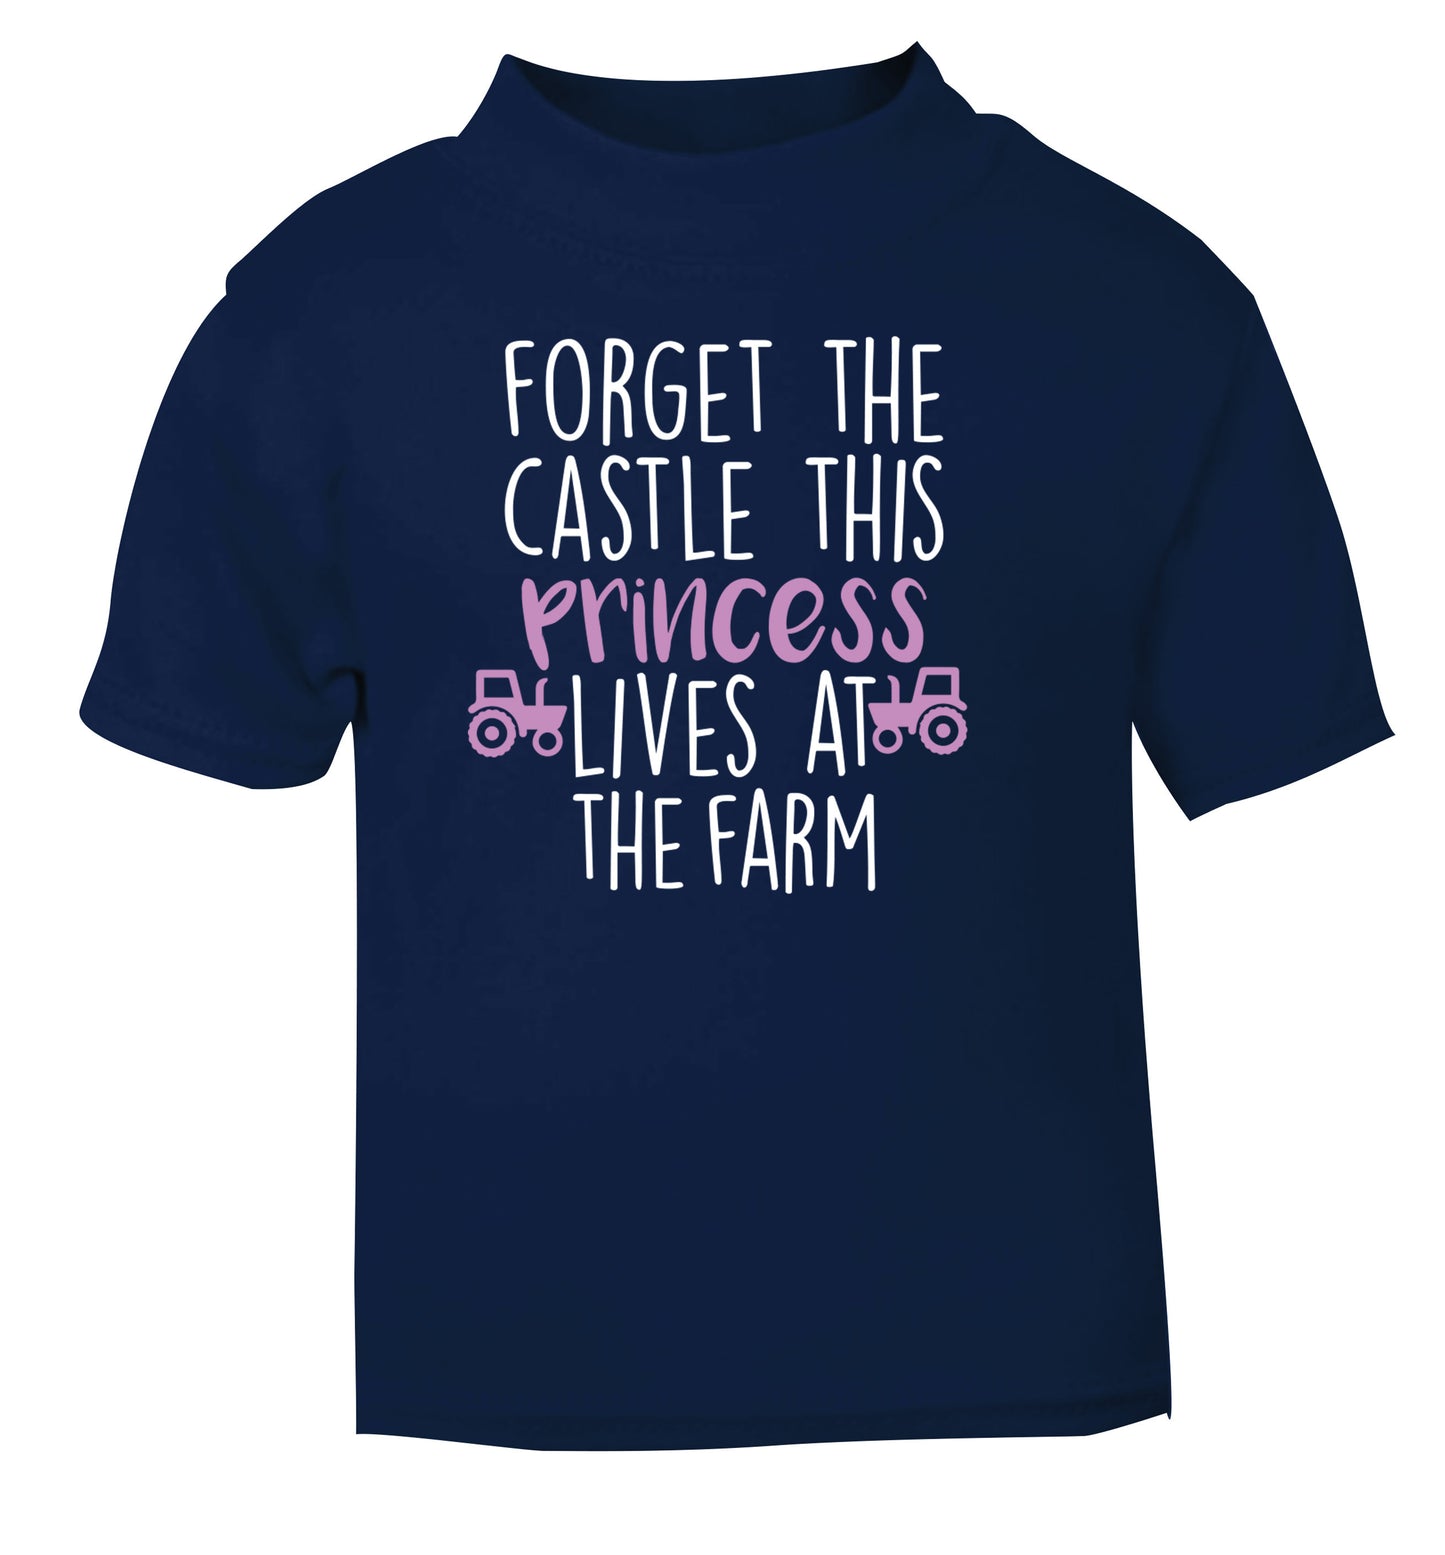 Forget the castle this princess lives at the farm navy Baby Toddler Tshirt 2 Years